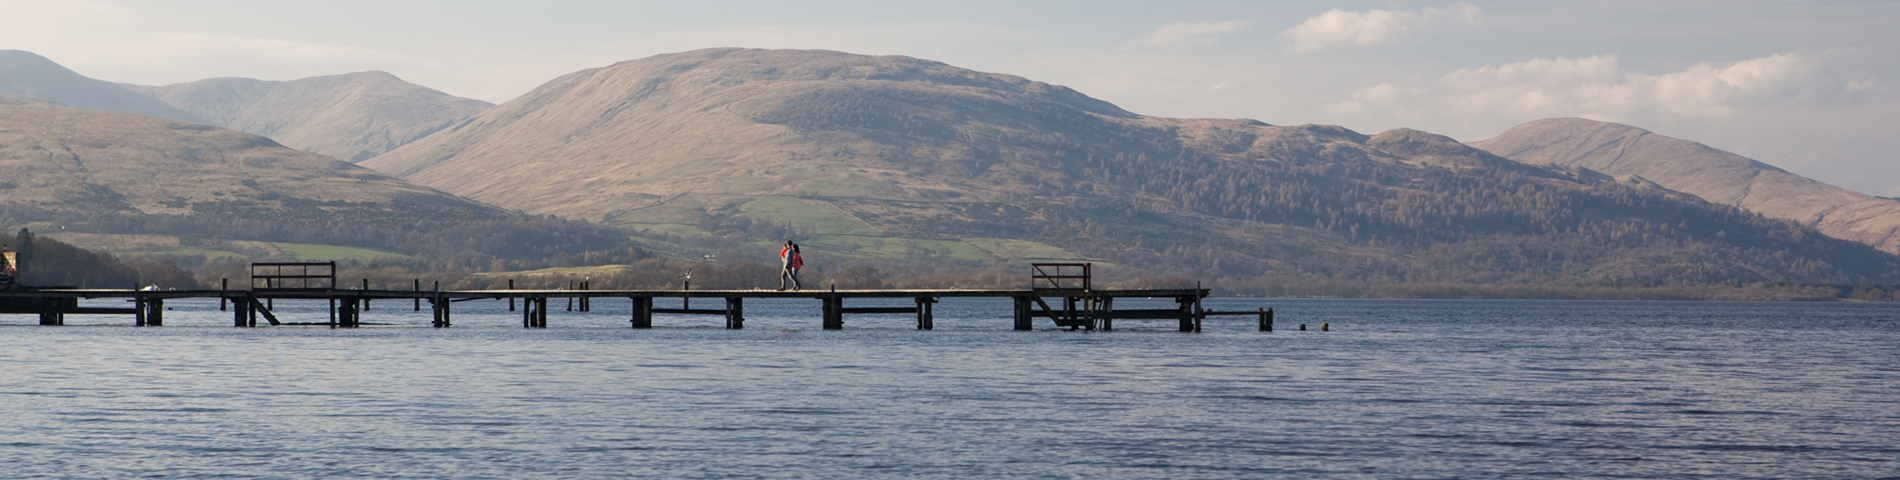 Pier on Loch Lomond with the hills in the background